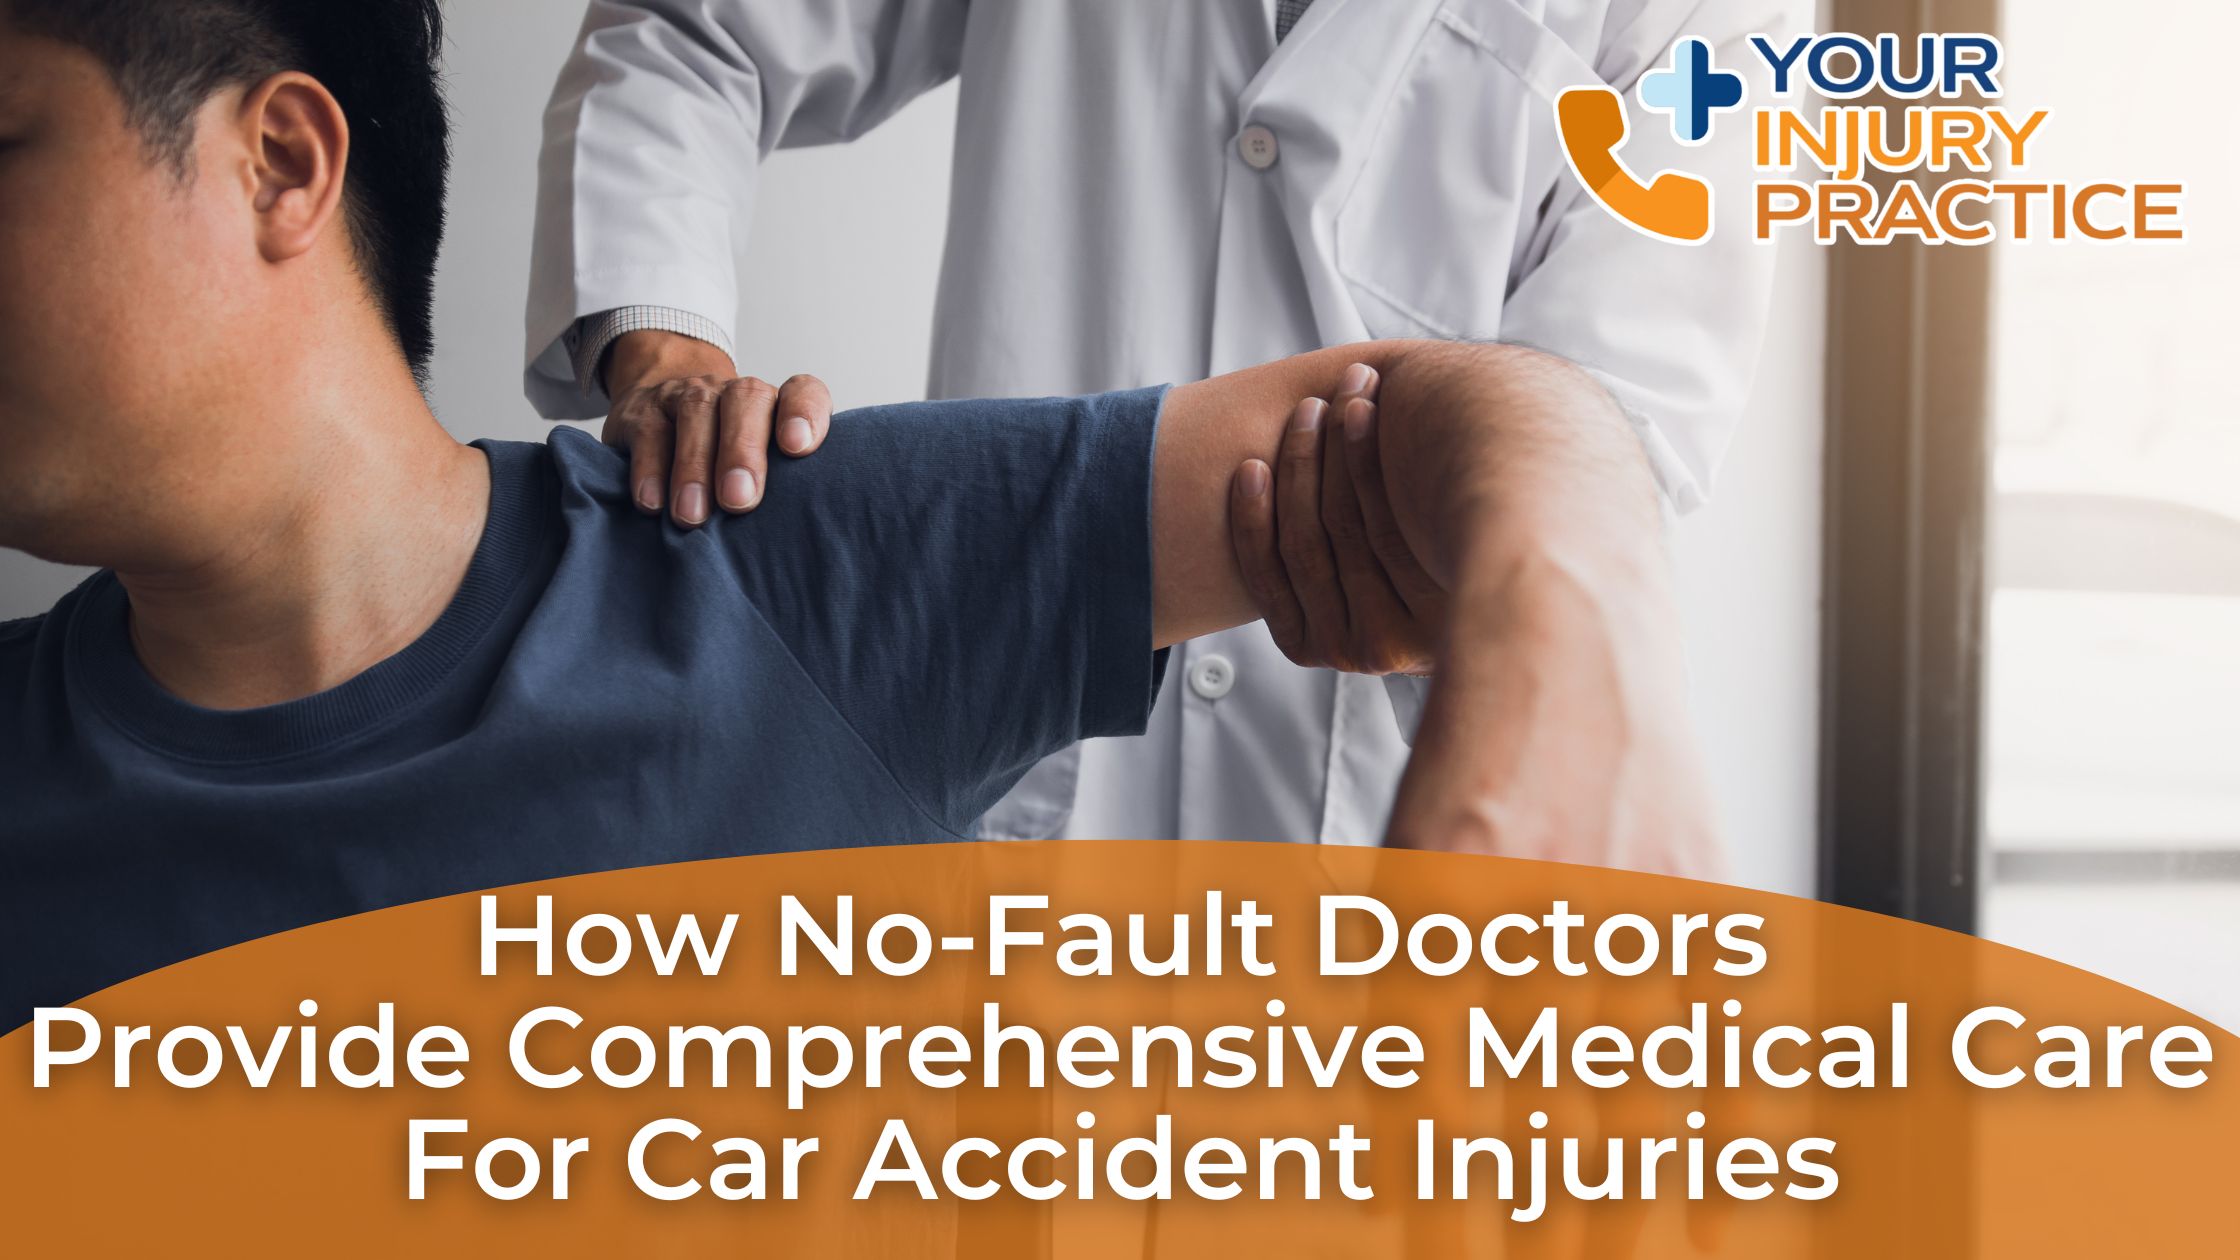 How No-Fault Doctors Provide Comprehensive Medical Care for Car Accident Injuries